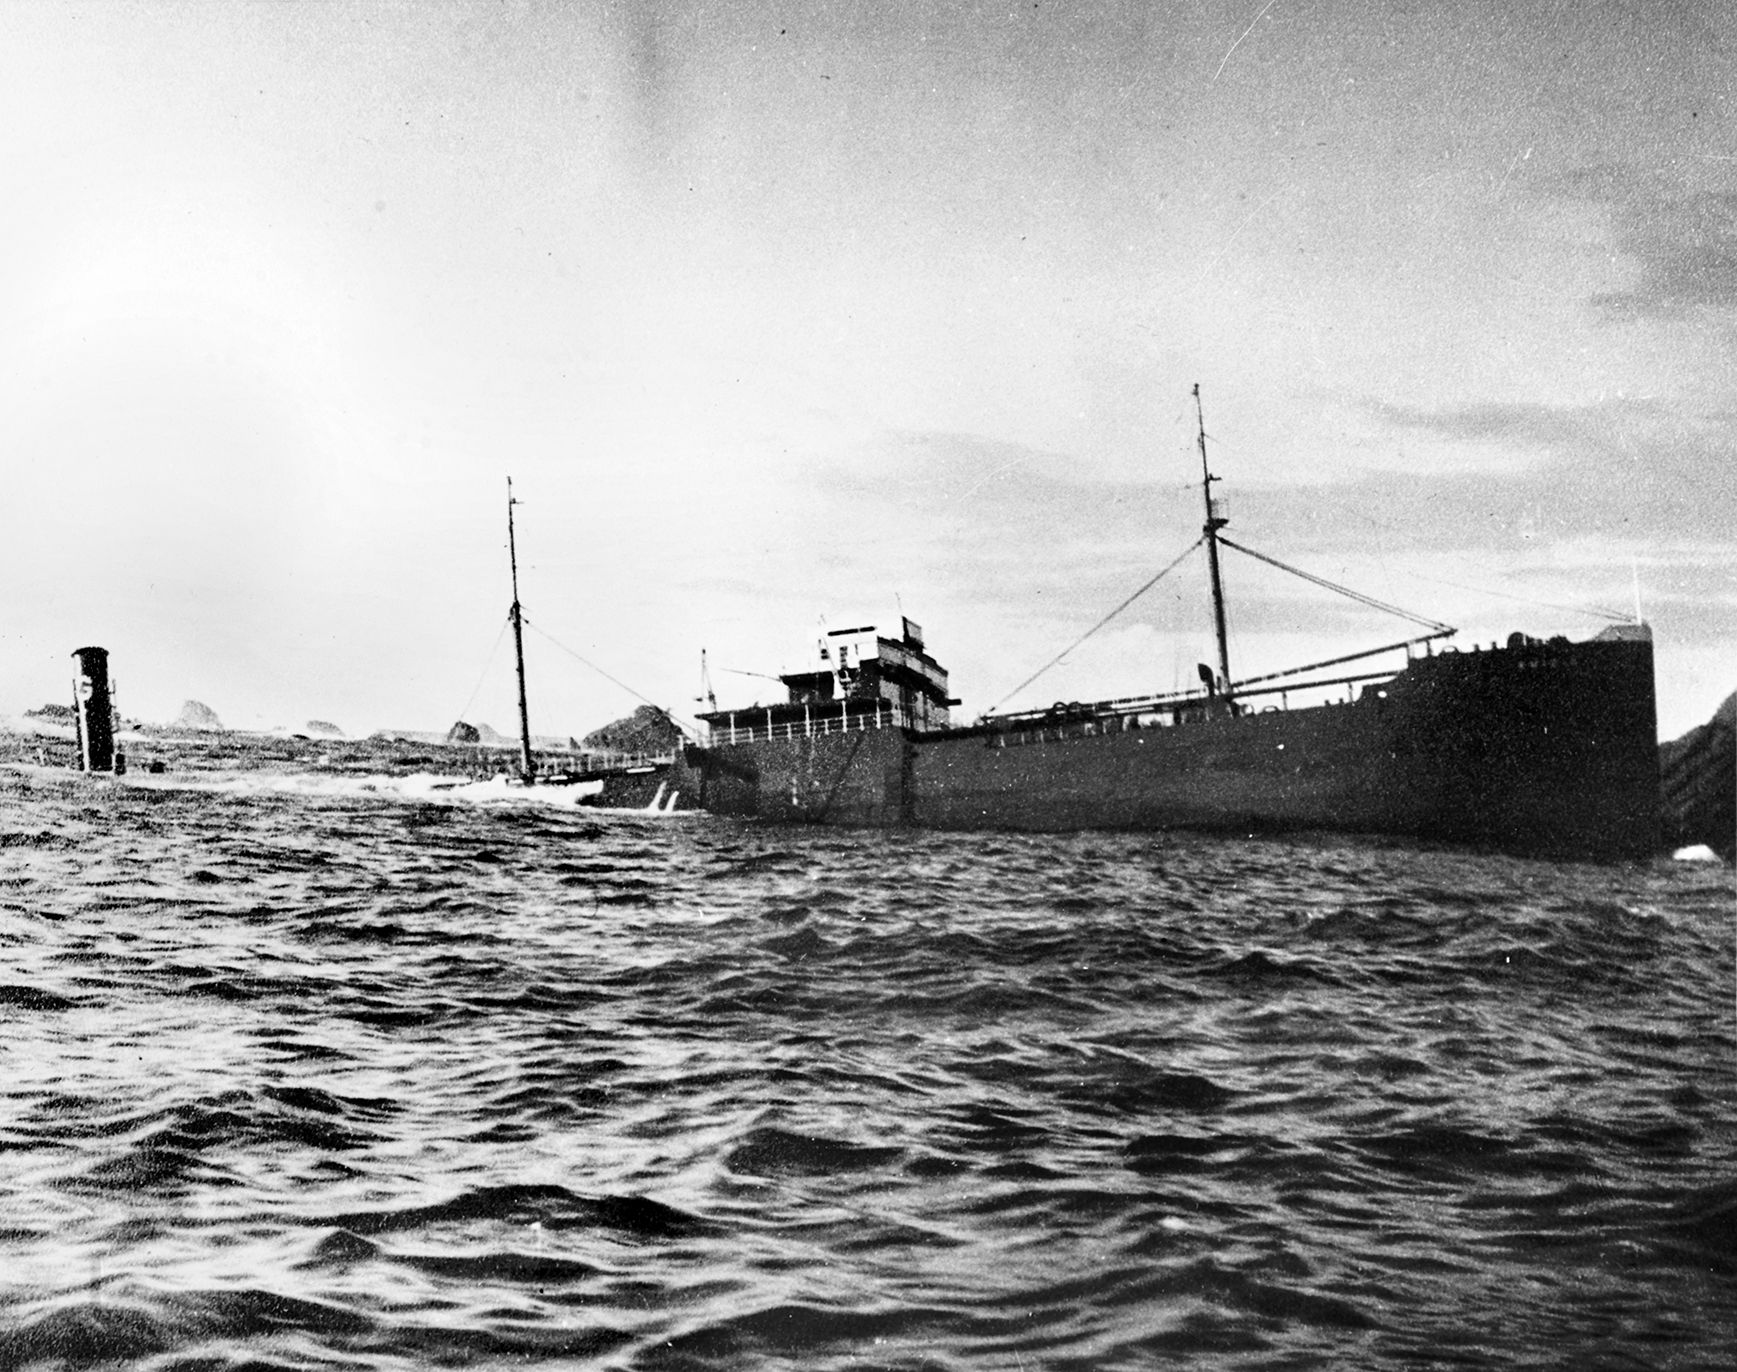 On December 20, 1941, I-19 and seven other Japanese subs attacked allied shipping along the west coasts of the U.S. and Canada. The General Petroleum Corporation tanker SS Emidio became one of the first casualties off California's Pacific Coast.